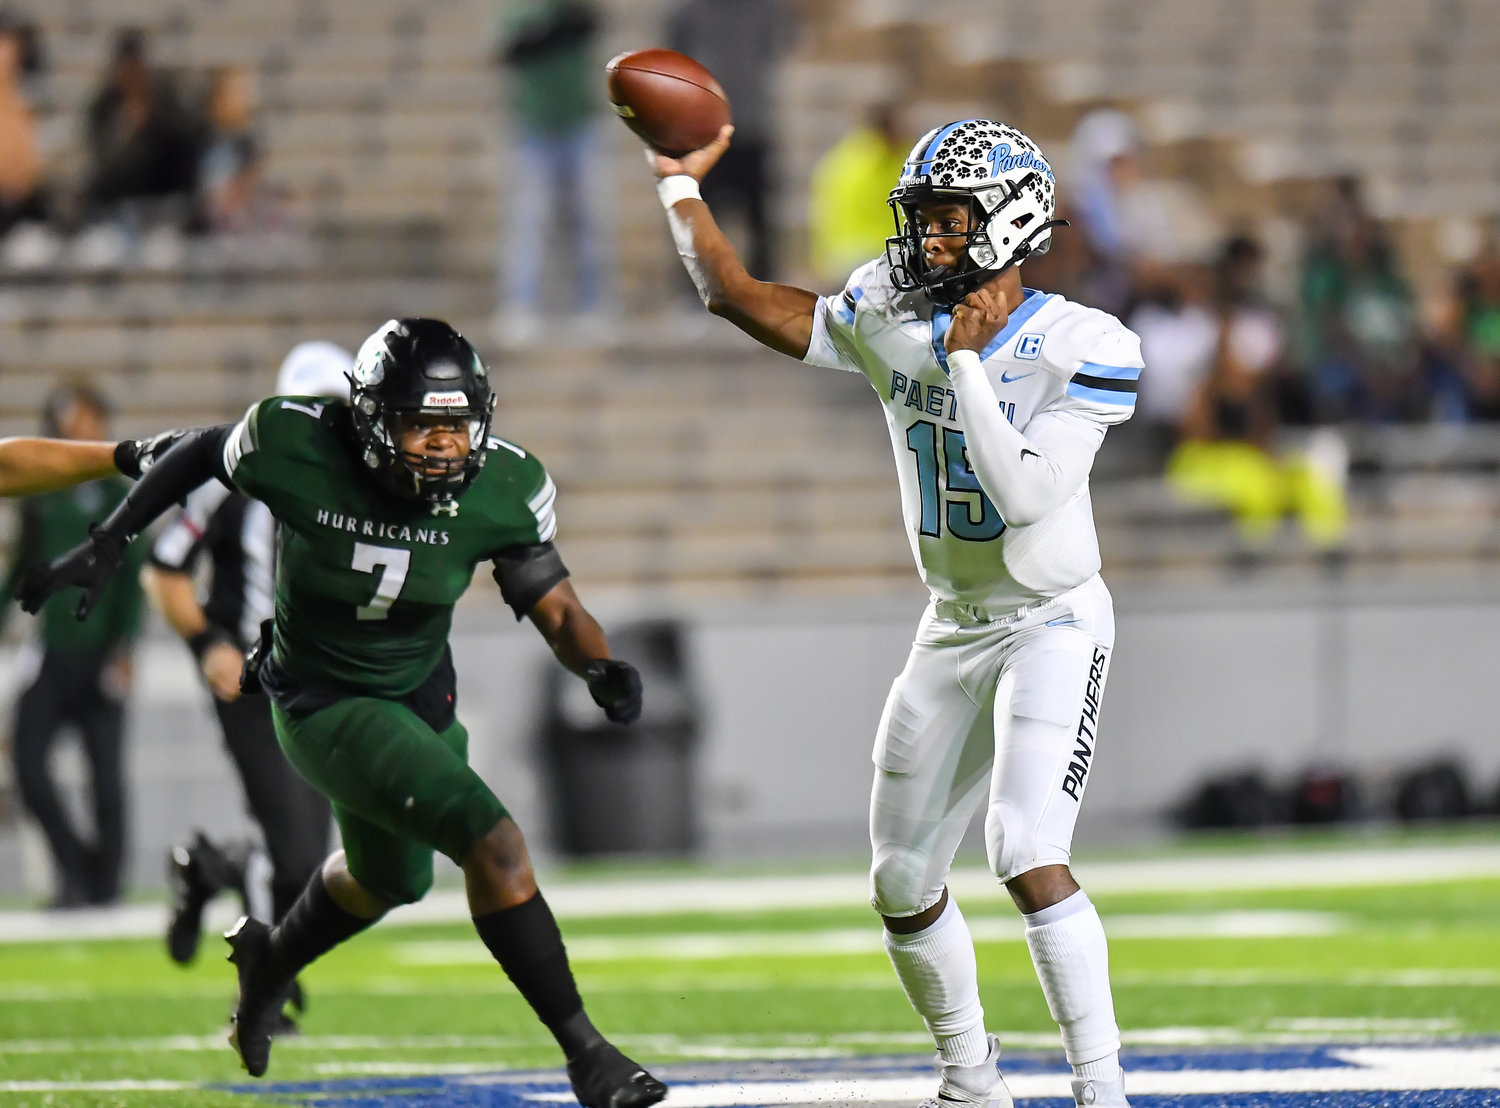 Houston, Tx. Dec 3, 2021: Paetow's QB CJ Dumas #15 delivers a pass during the quarterfinal playoff game between Paetow and F,B. Hightower at Rice Stadium in Houston. (Photo by Mark Gooman / Katy Times)